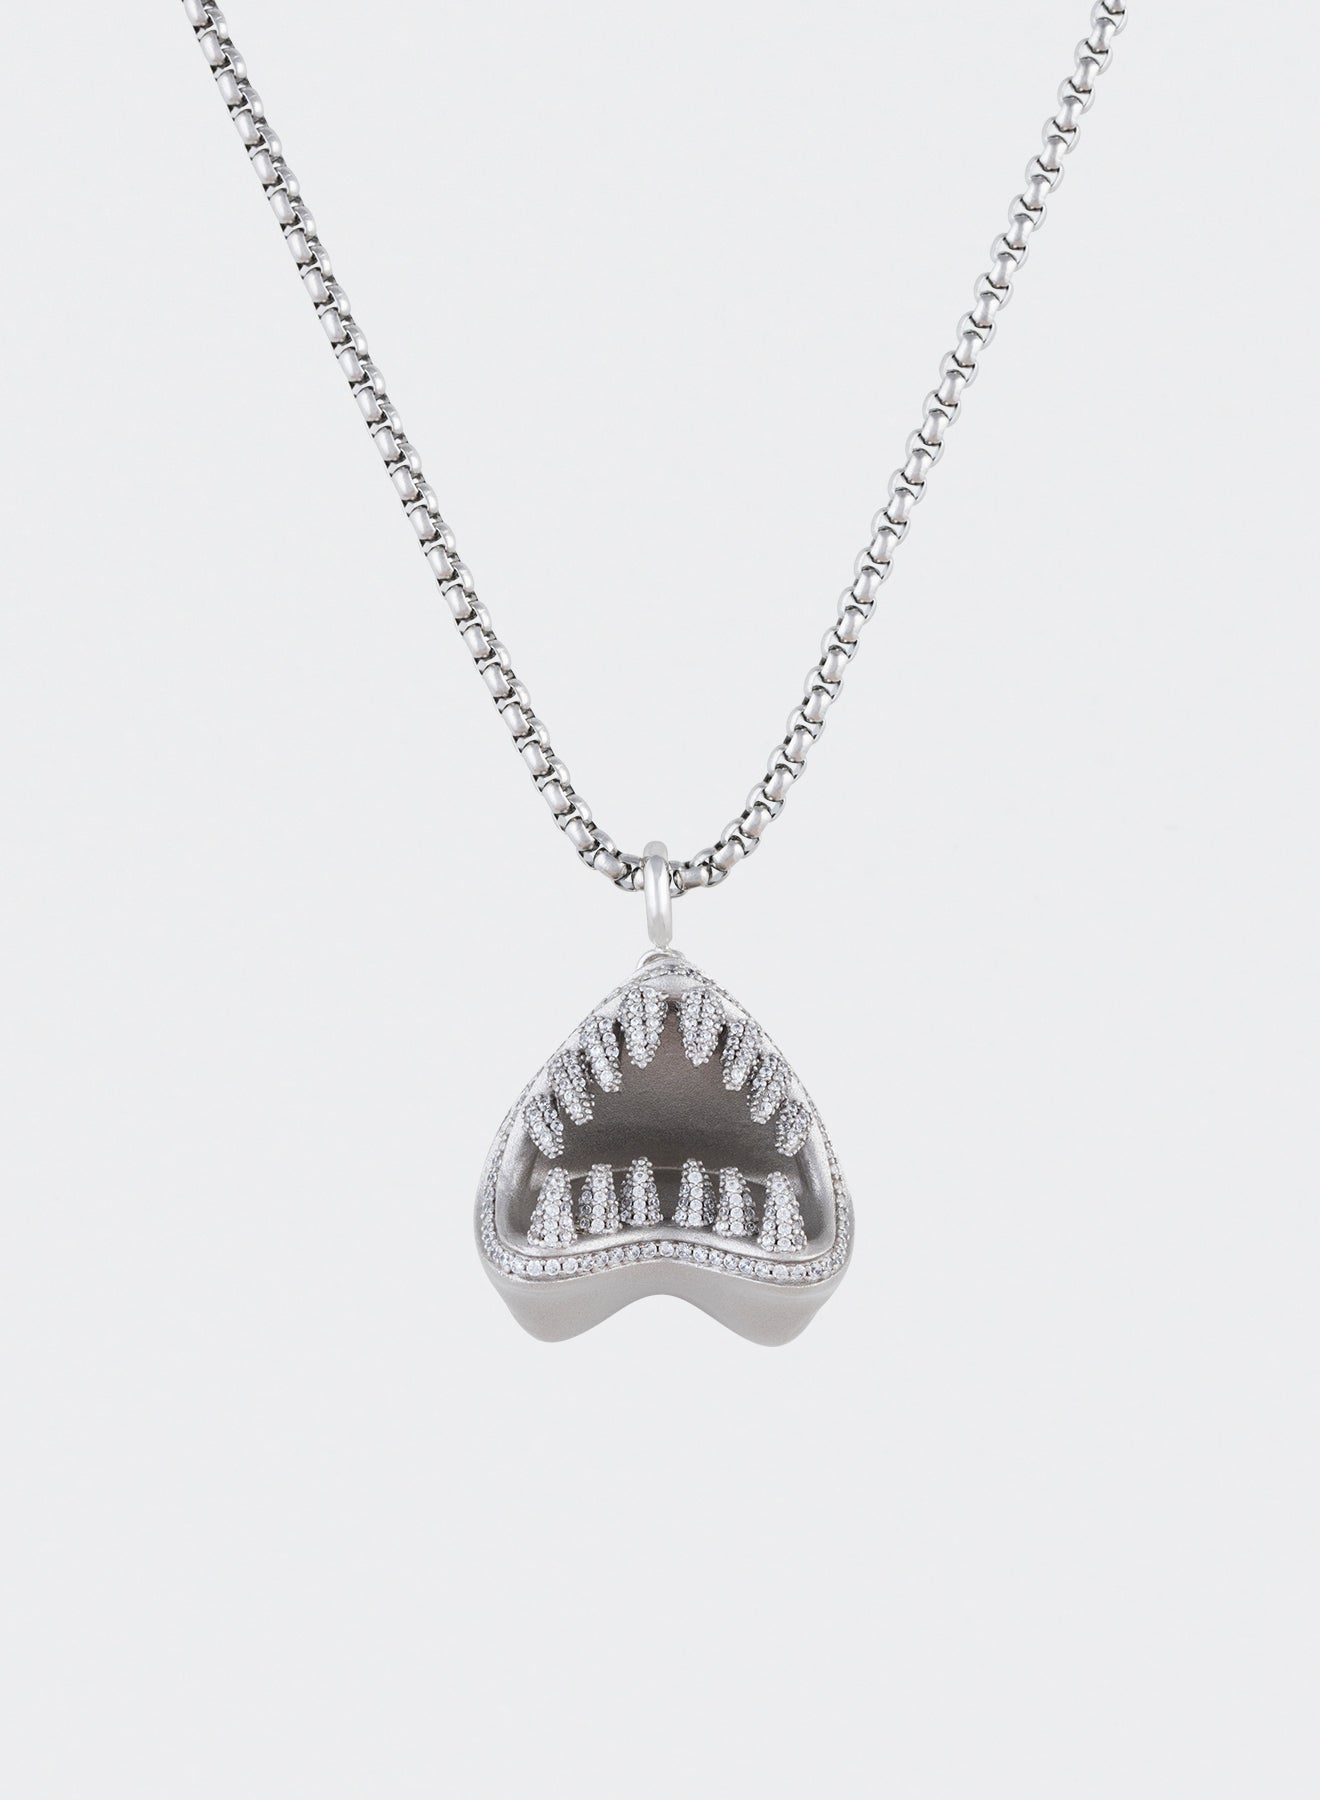 18k white gold coated jaws pendant necklace with hand-set micropavé stones in white, matte finishing, engraved logo and 3mm box chain